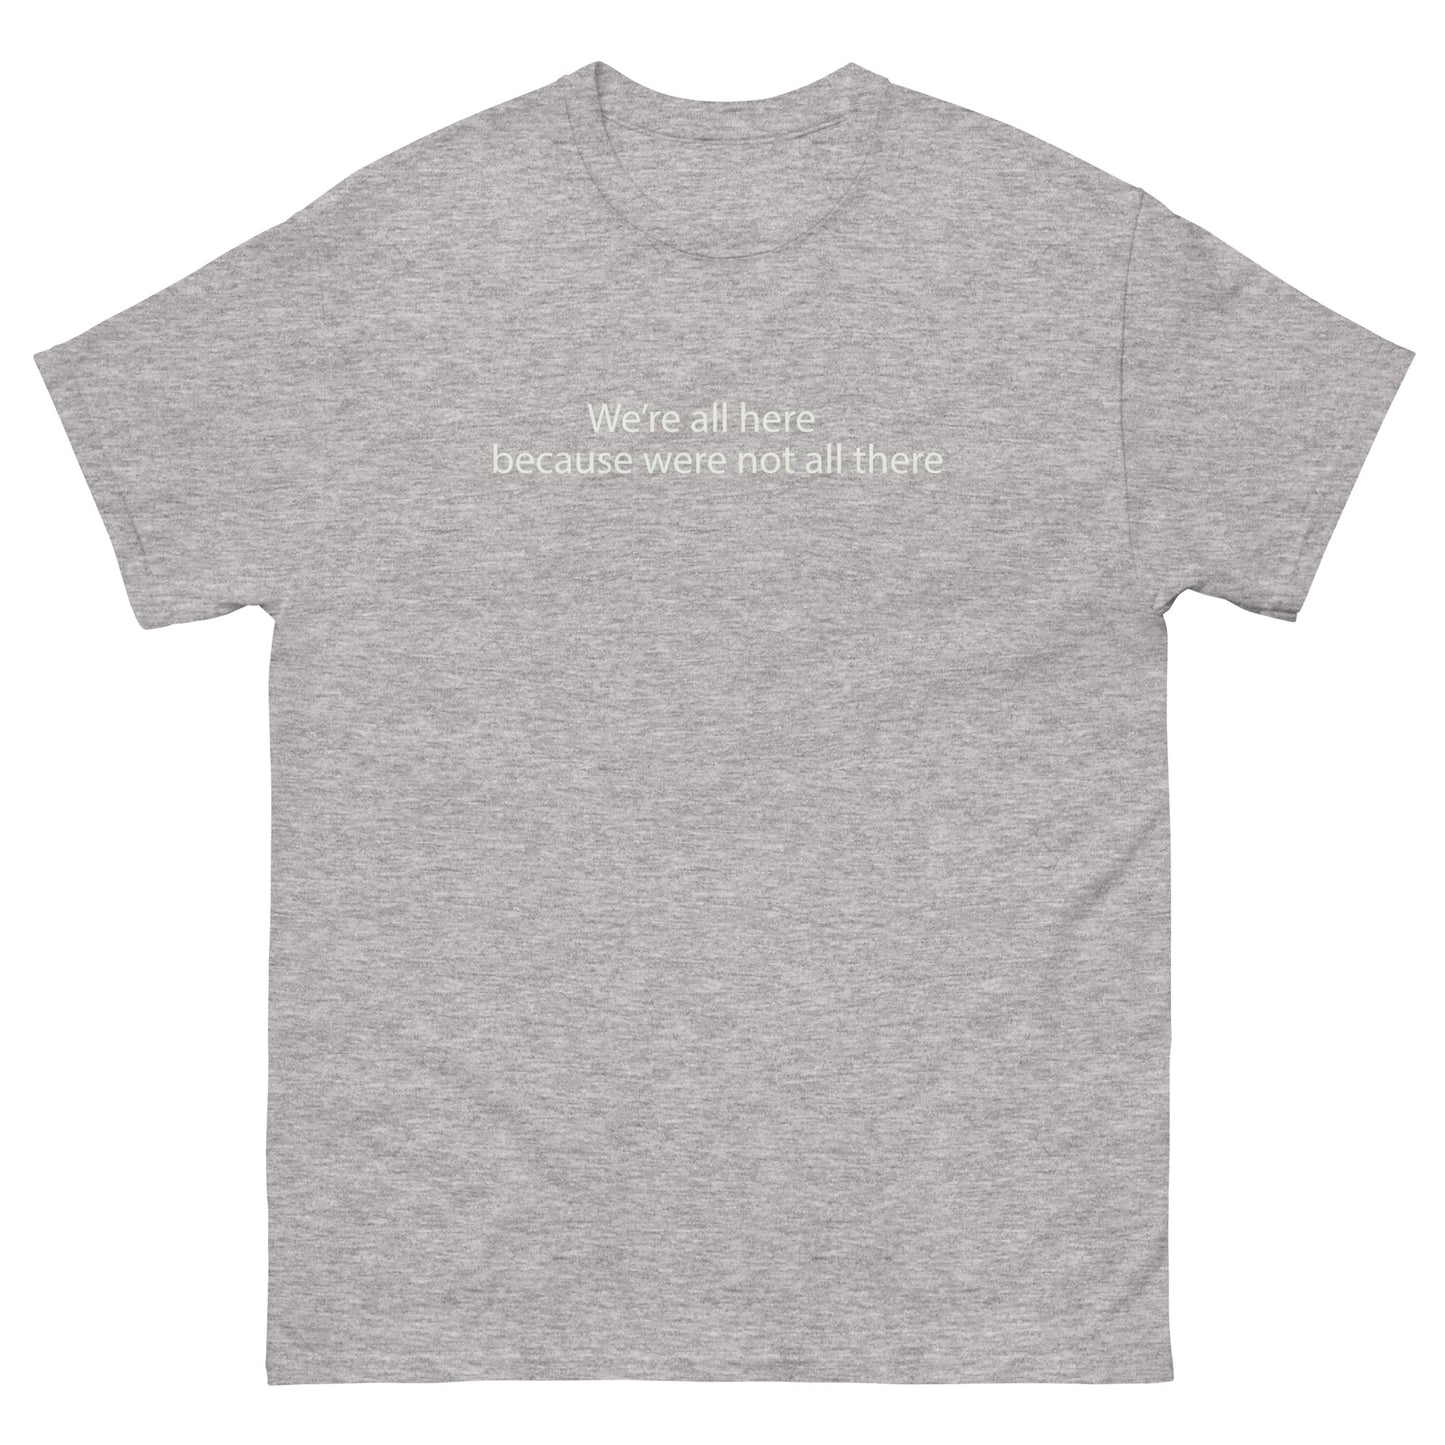 We're all here because were not all there t shirt